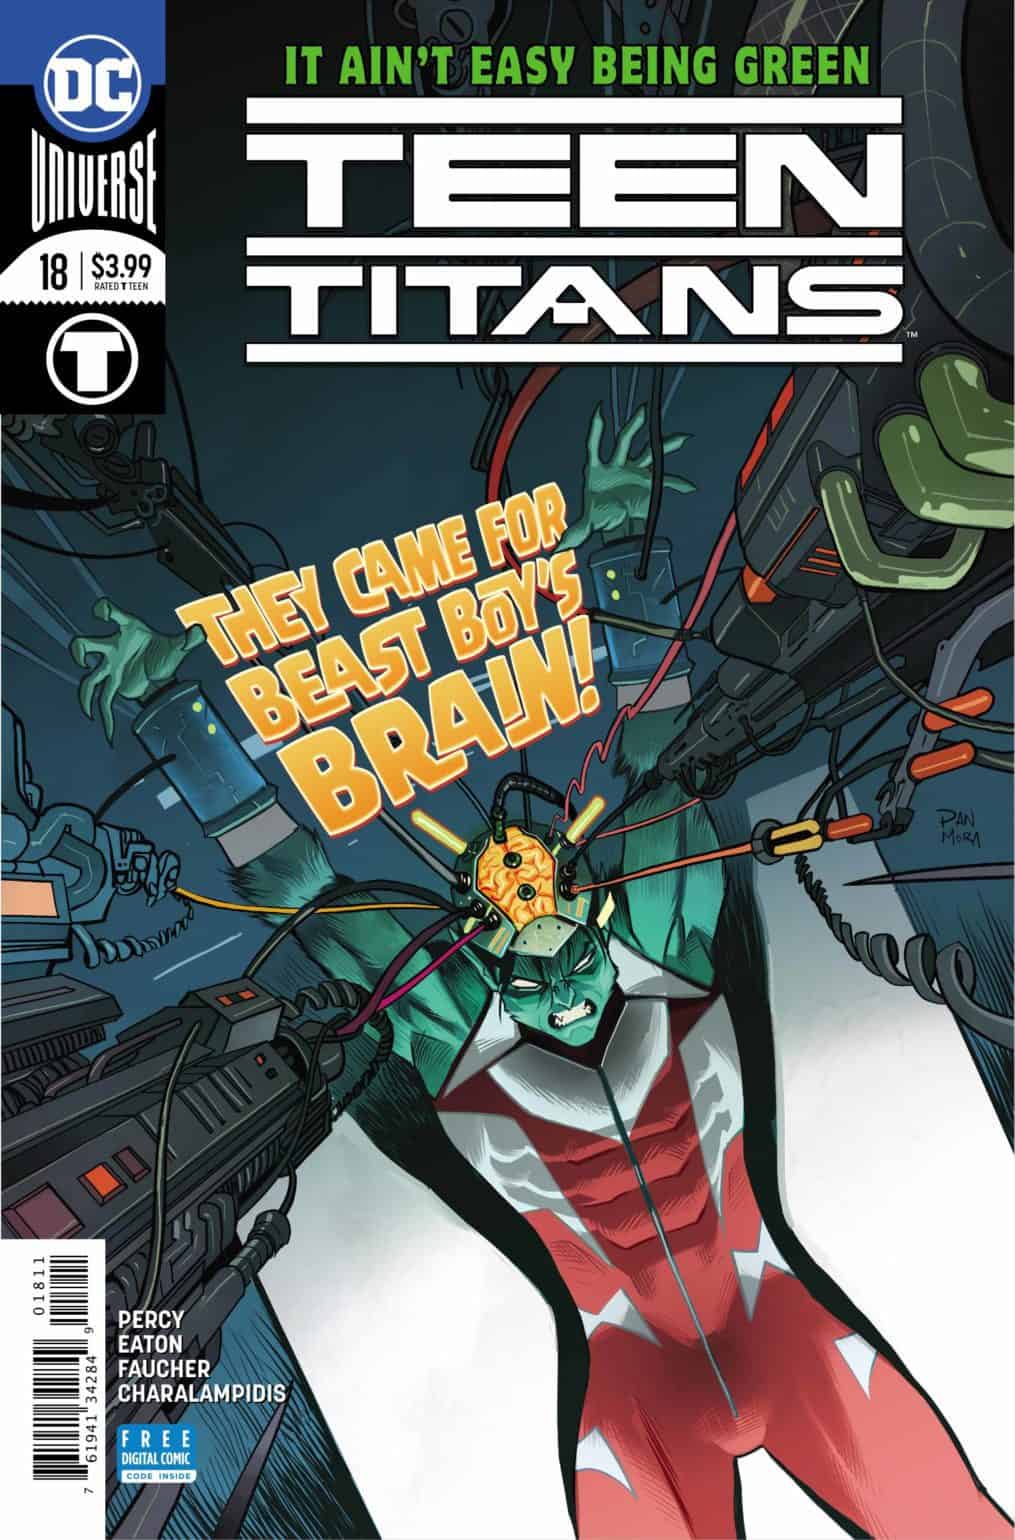 Exclusive Preview: TEEN TITANS #18